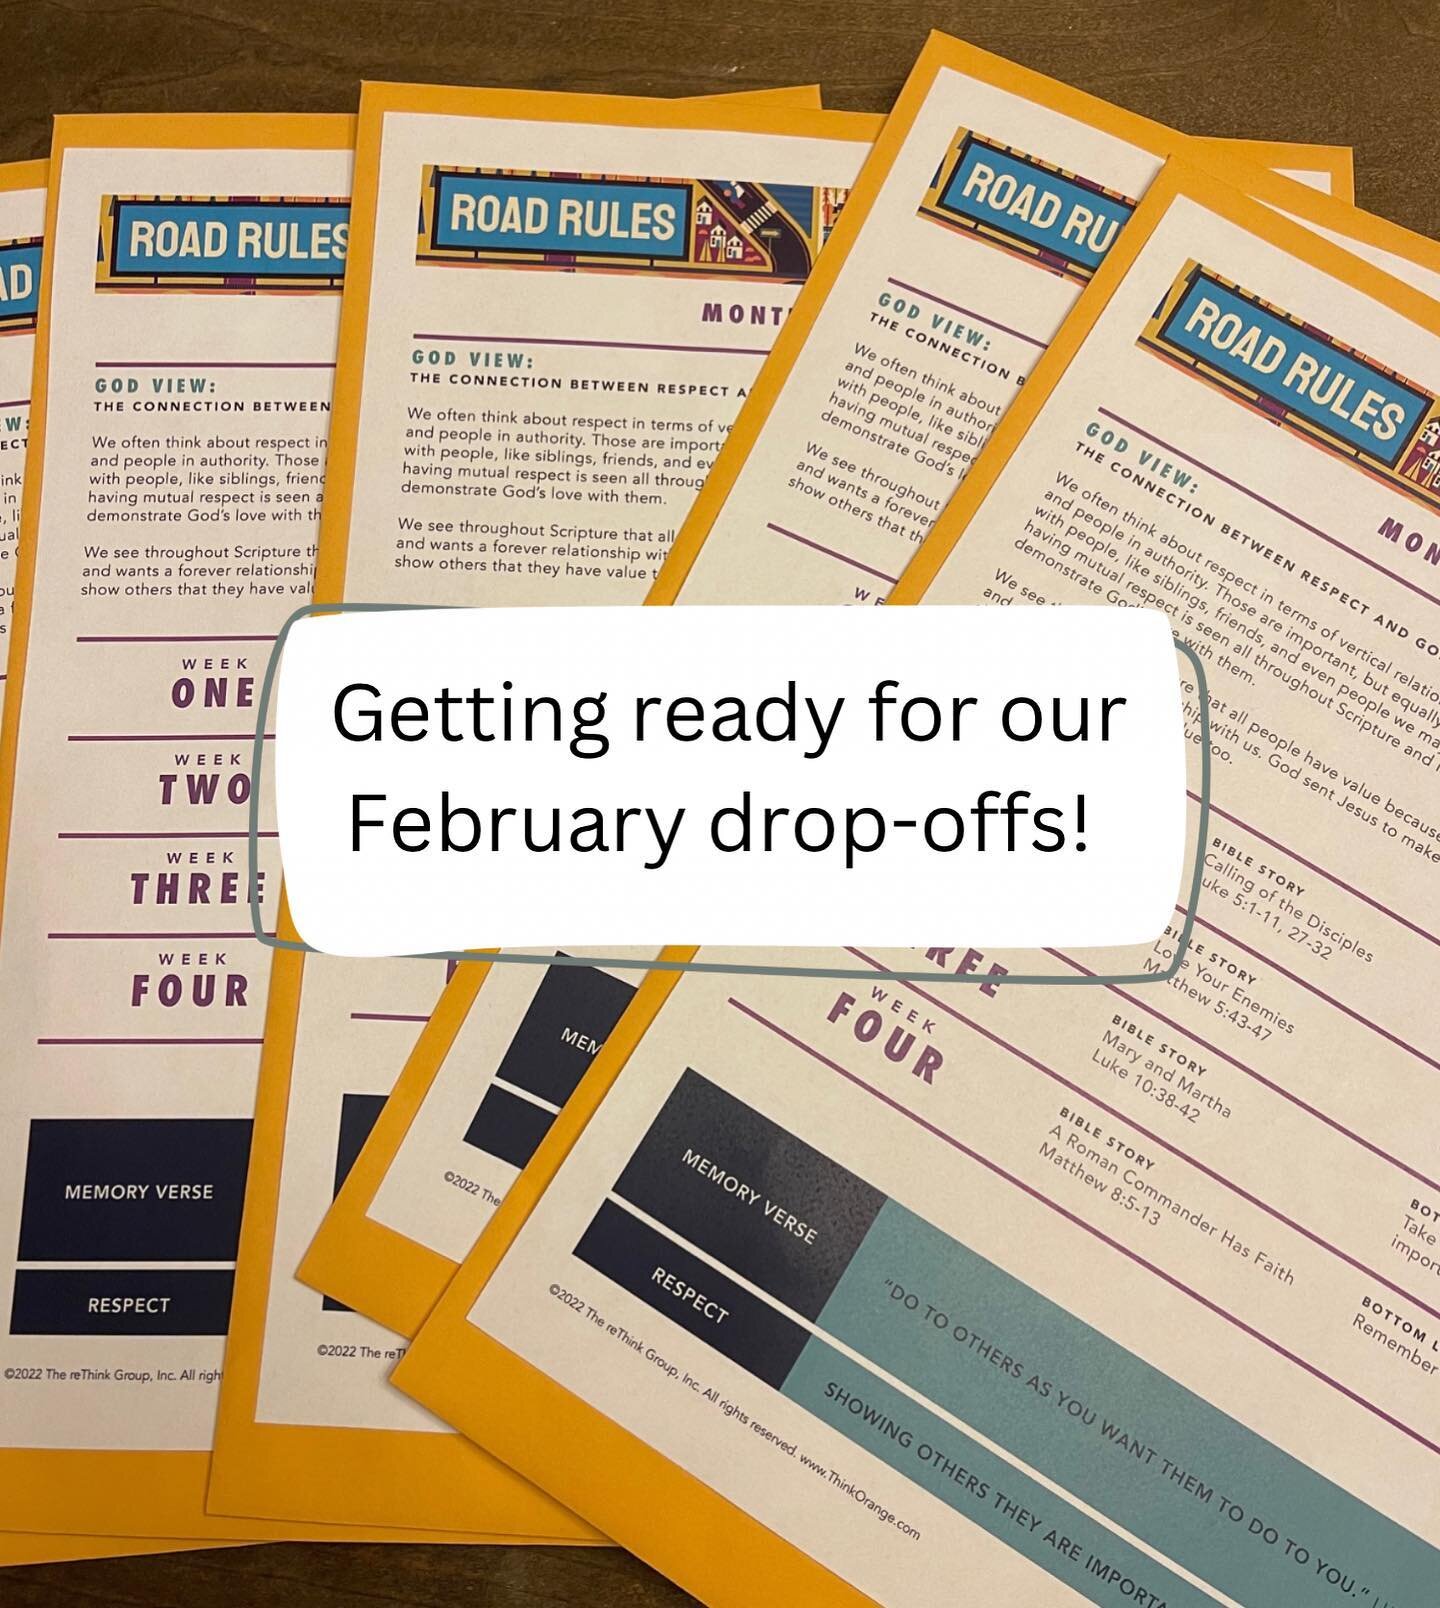 Tomorrow is the day! 🤩 We&rsquo;re ready to drop off our February activity packets and can&rsquo;t wait for you to see them. Looking forward to seeing what God has in store for this month with these fantastic lessons!